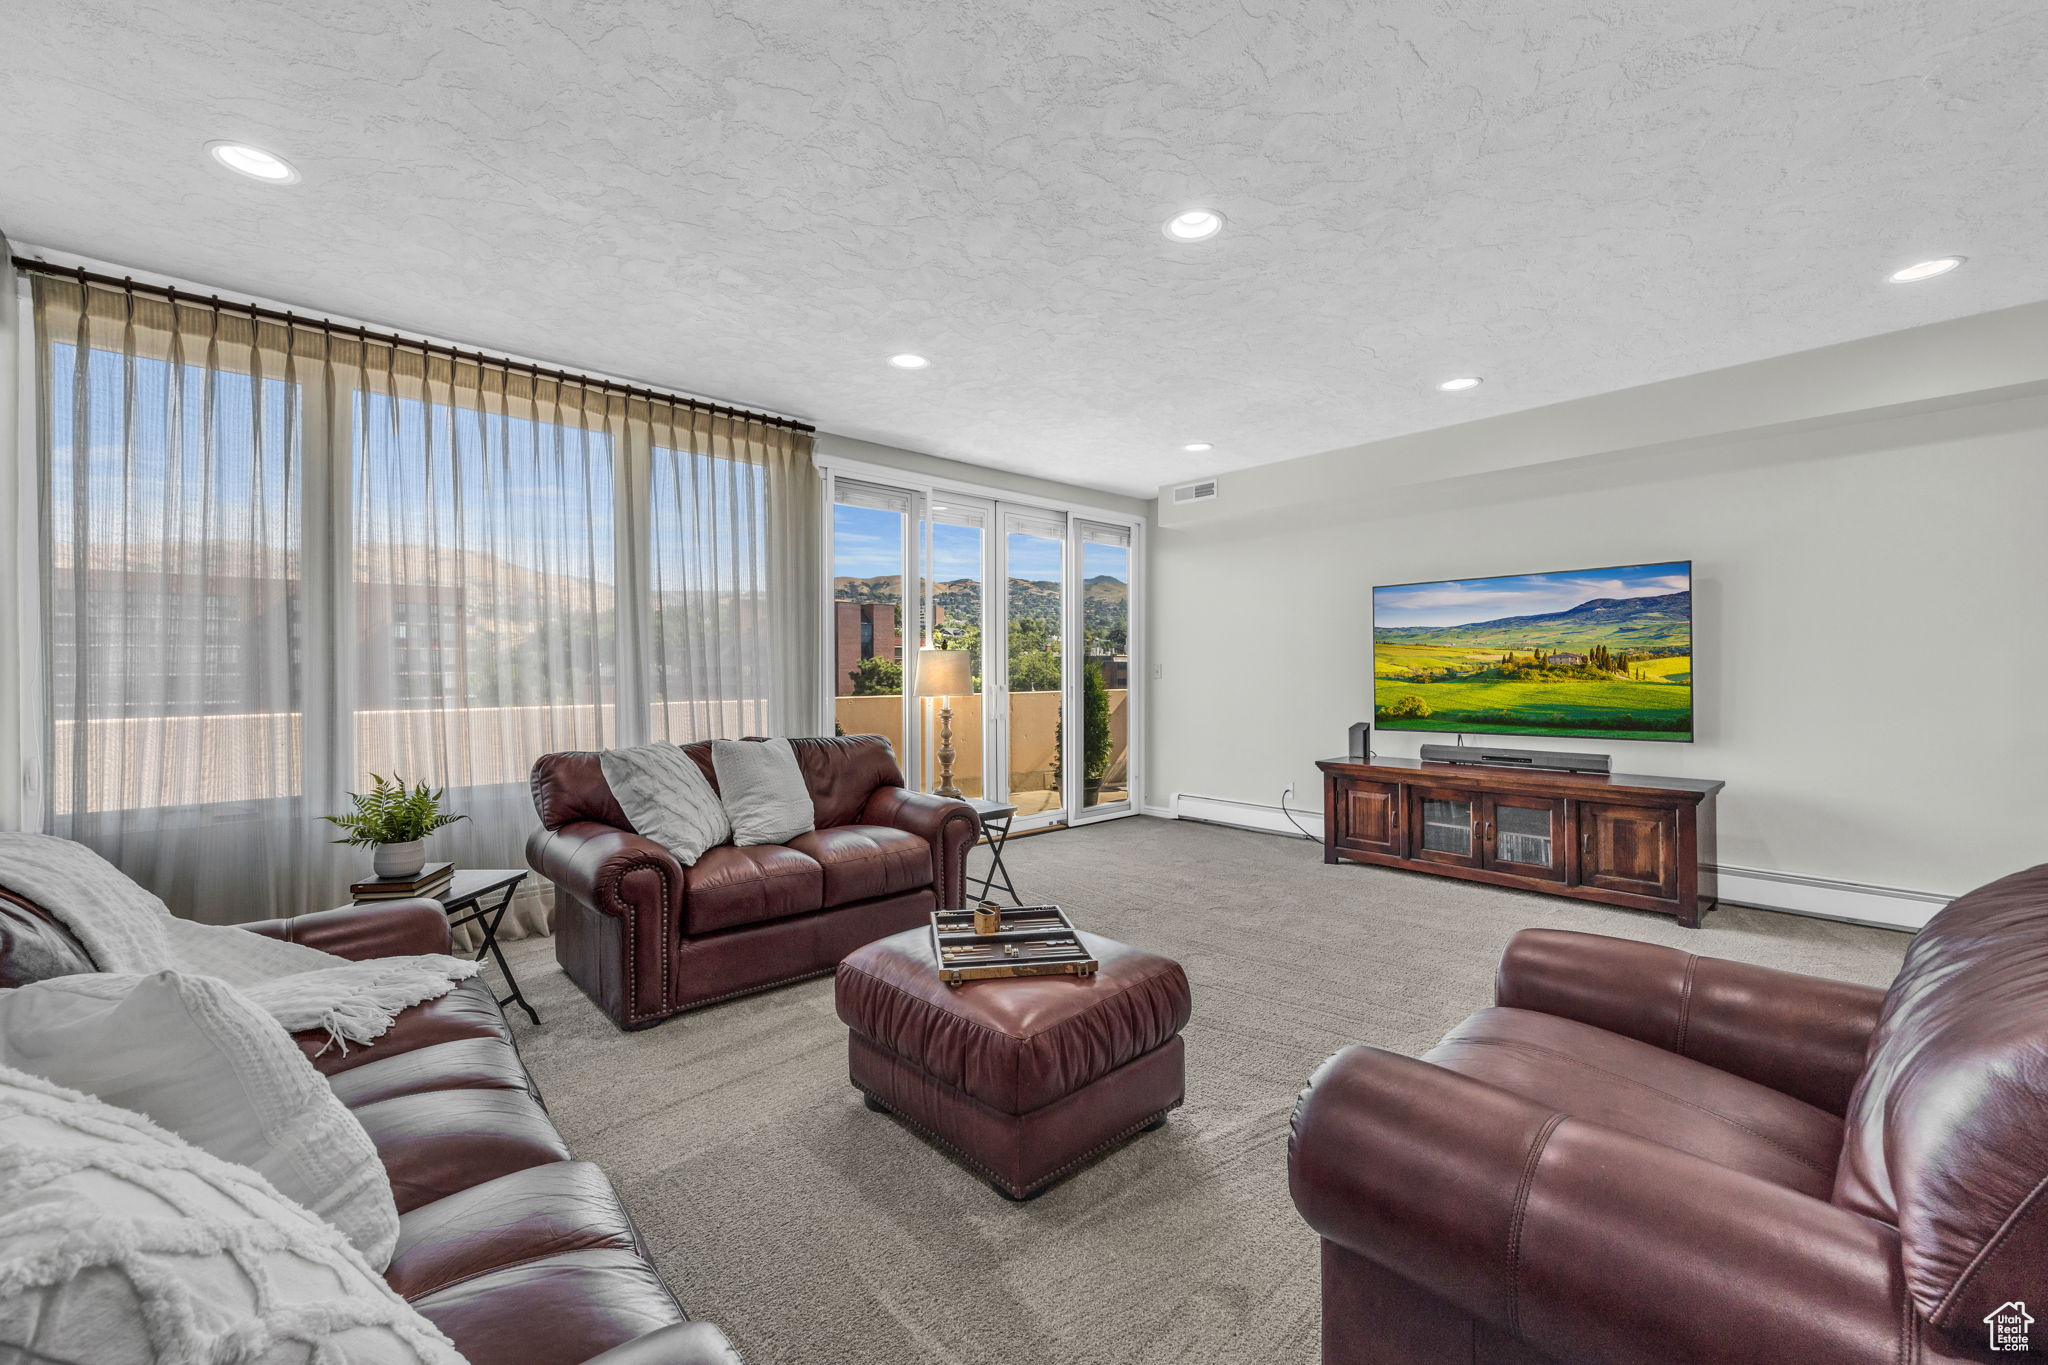 Carpeted living room featuring floor to ceiling windows, a baseboard radiator, and a textured ceilingGreat room with plenty of natural light, floor-to-ceiling windows, and a small office in the corner.  A flex space that can also be a primary bedroom suit